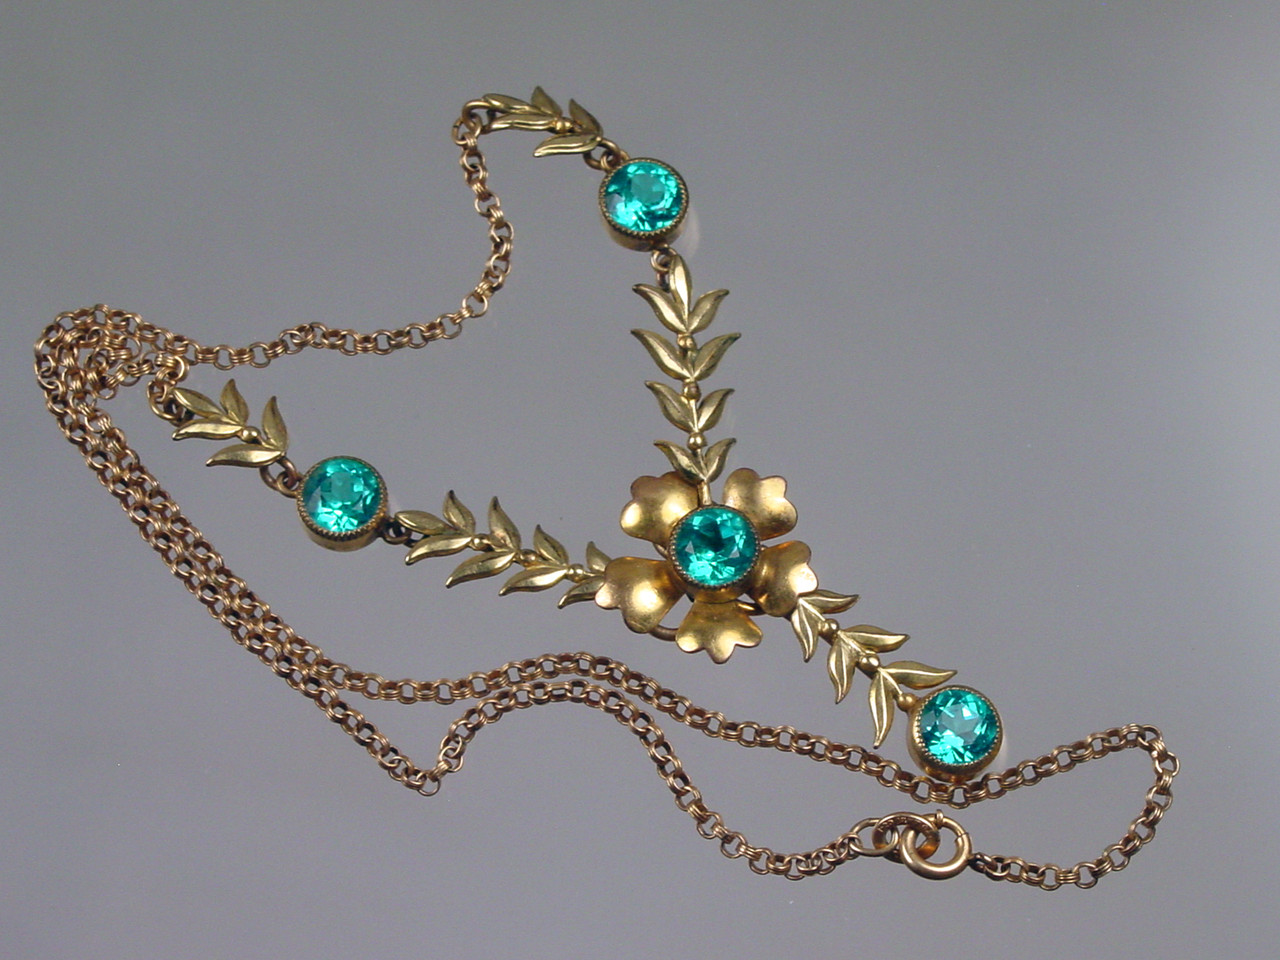 Retro Carl Art Gold Filled Floral Necklace with Blue Crystals